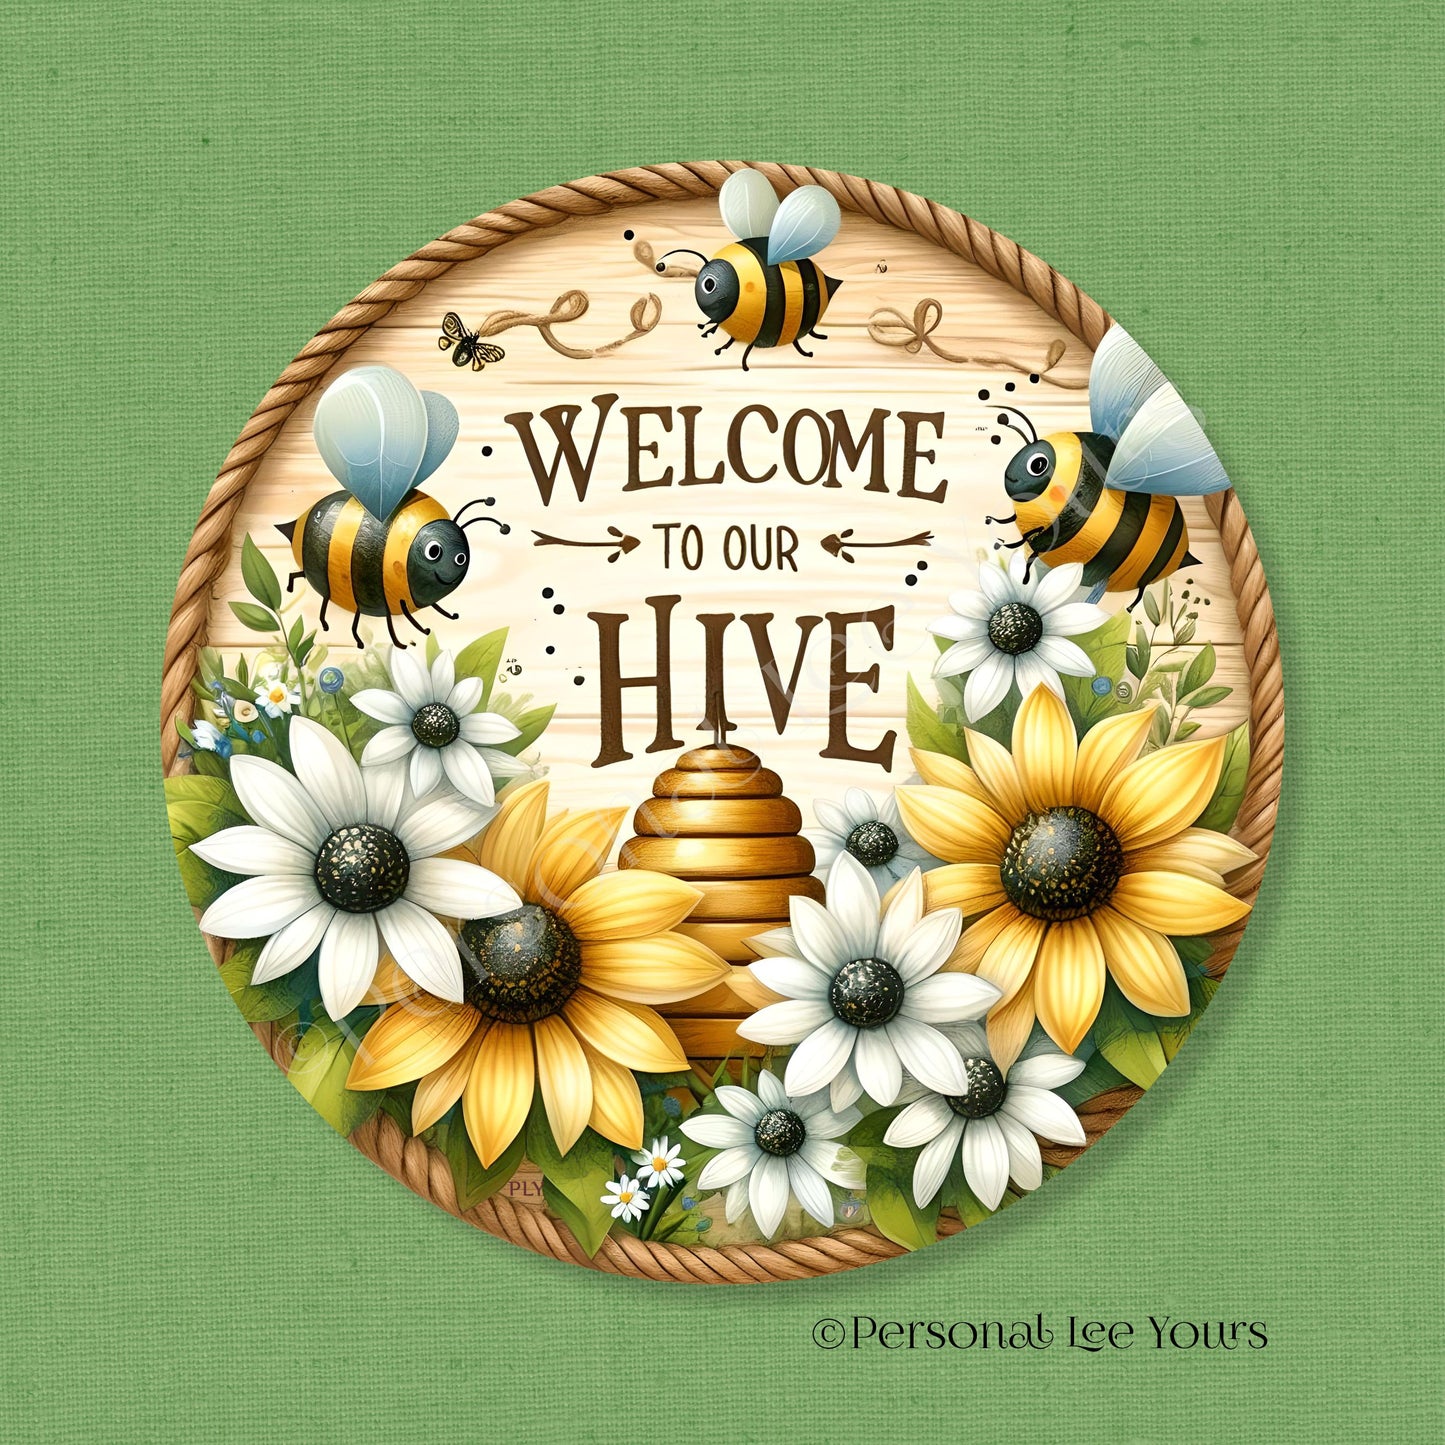 Wreath Sign * Welcome To Our Hive, White and Gold Sunflowers, Honey Bee * Round * Lightweight Metal